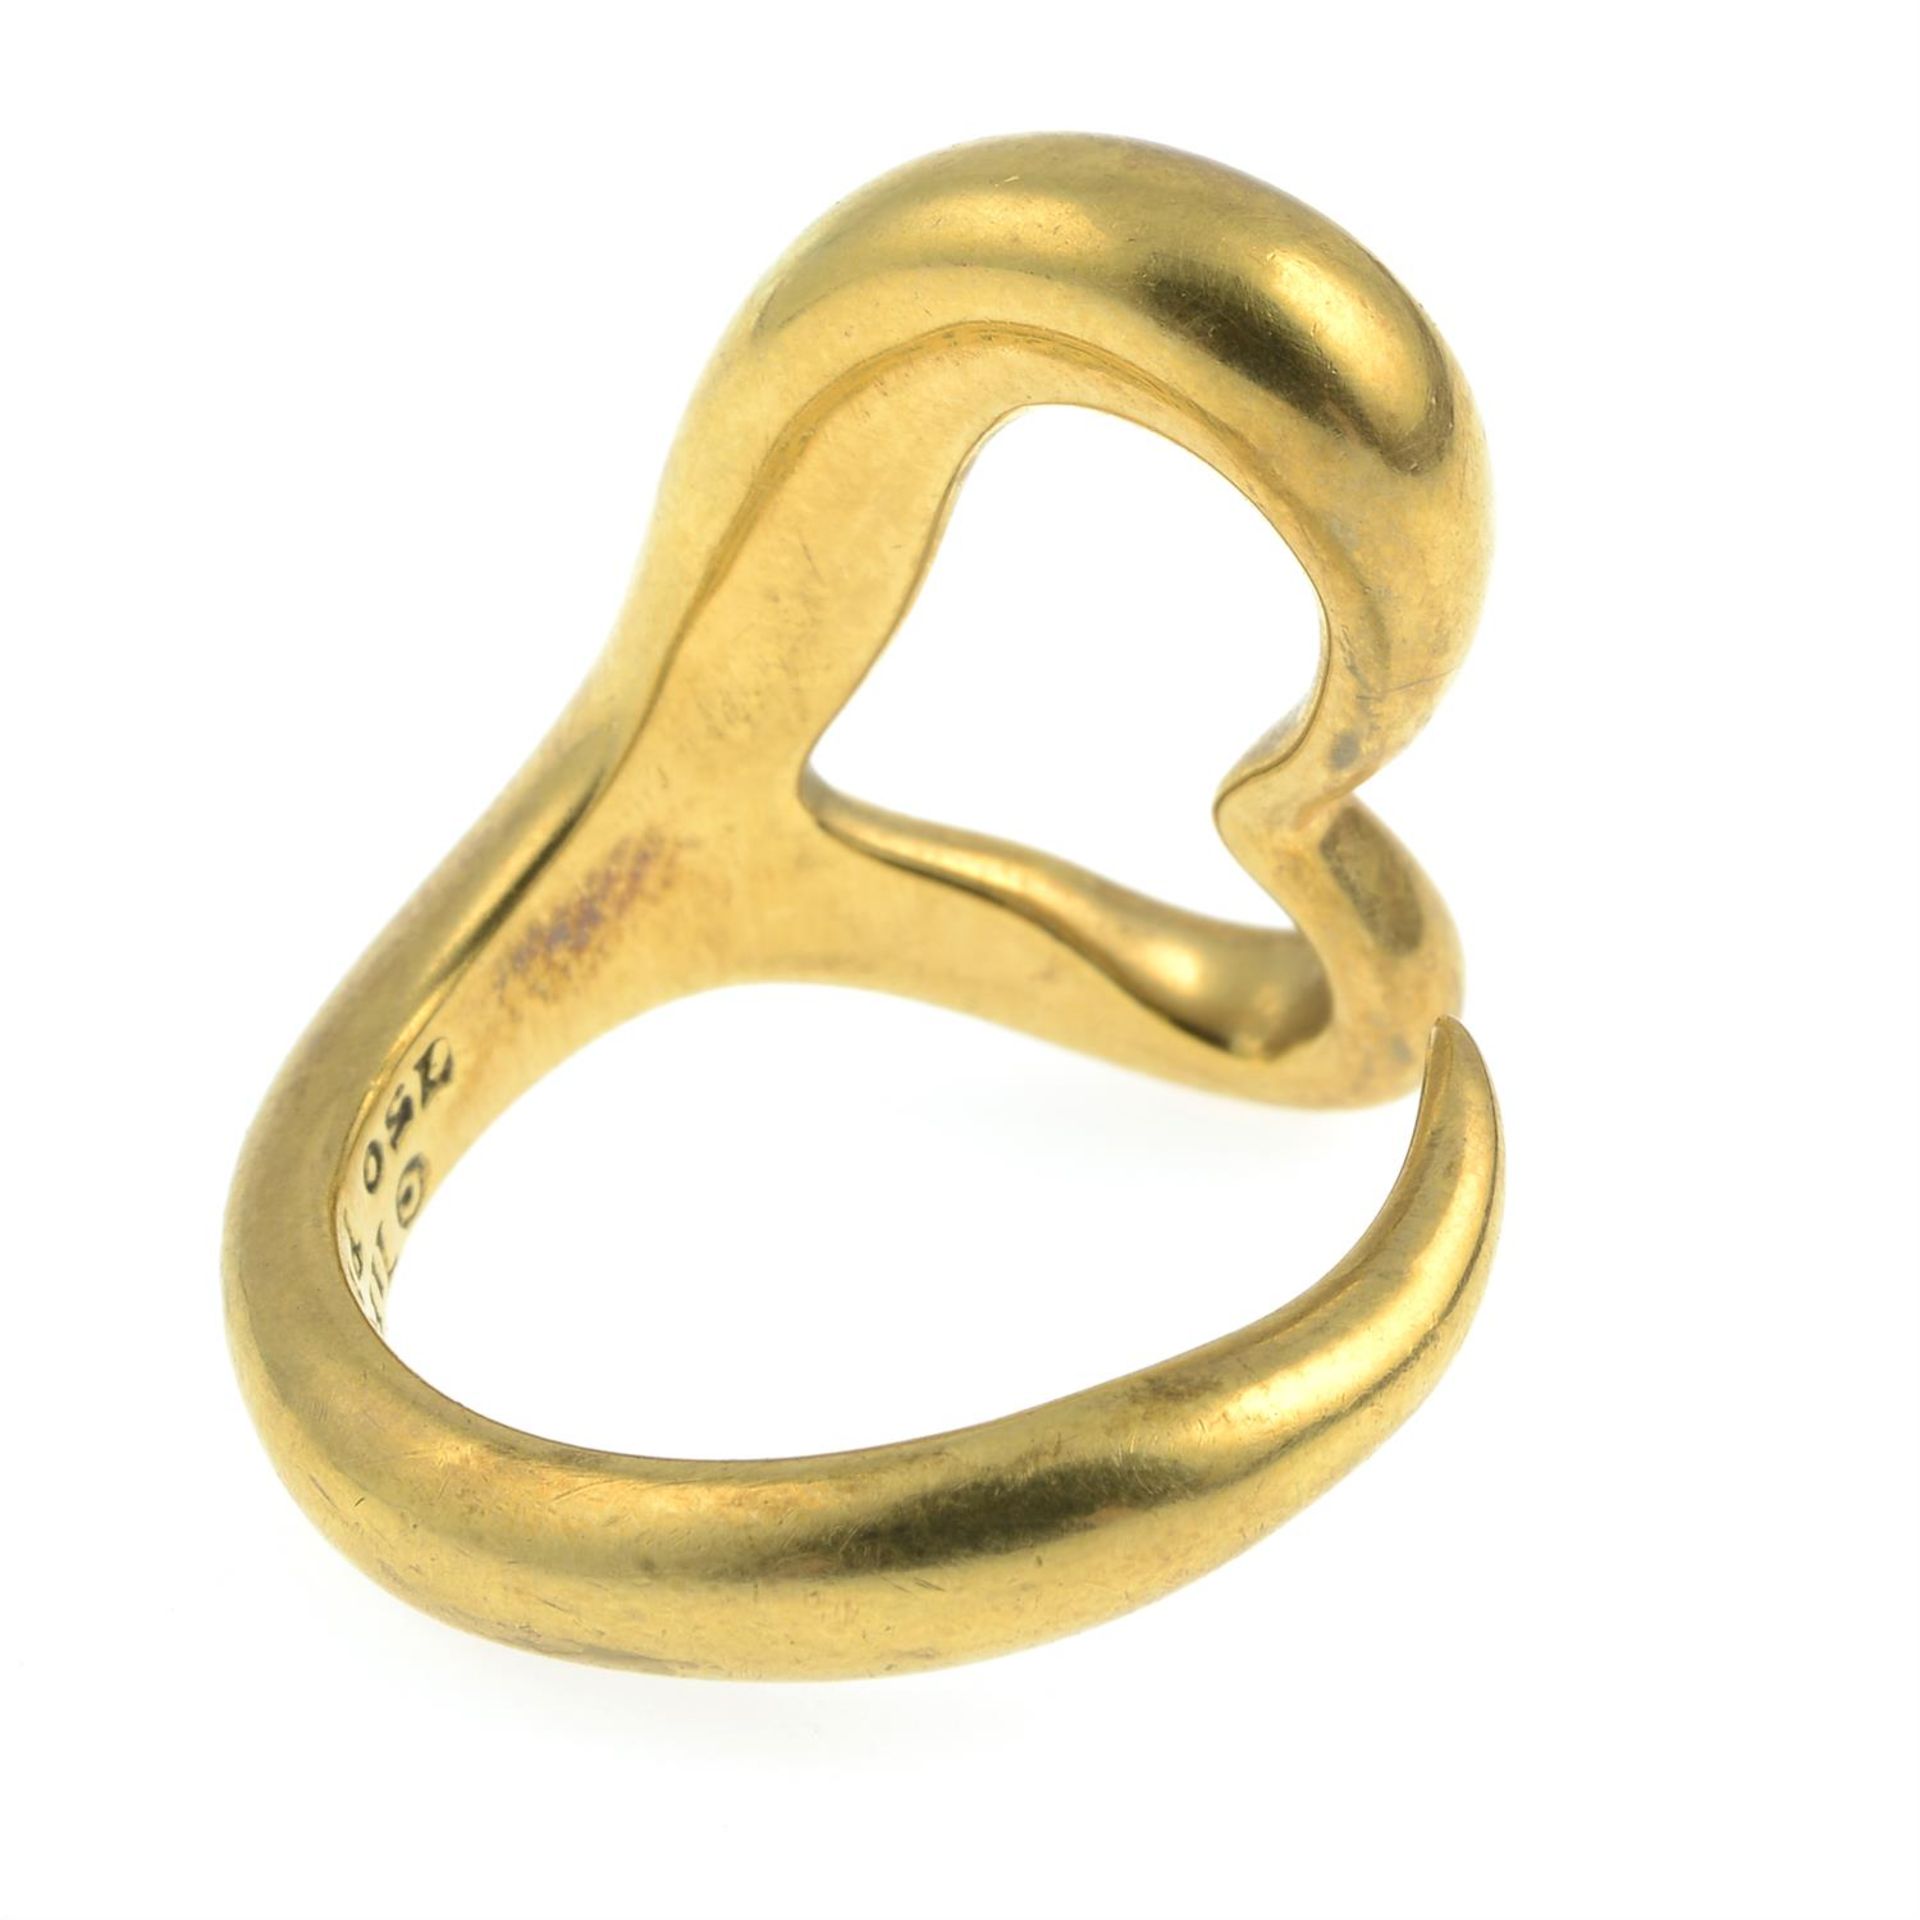 An 'Open Heart' dress ring, by Elsa Peretti for Tiffany & Co. - Image 2 of 3